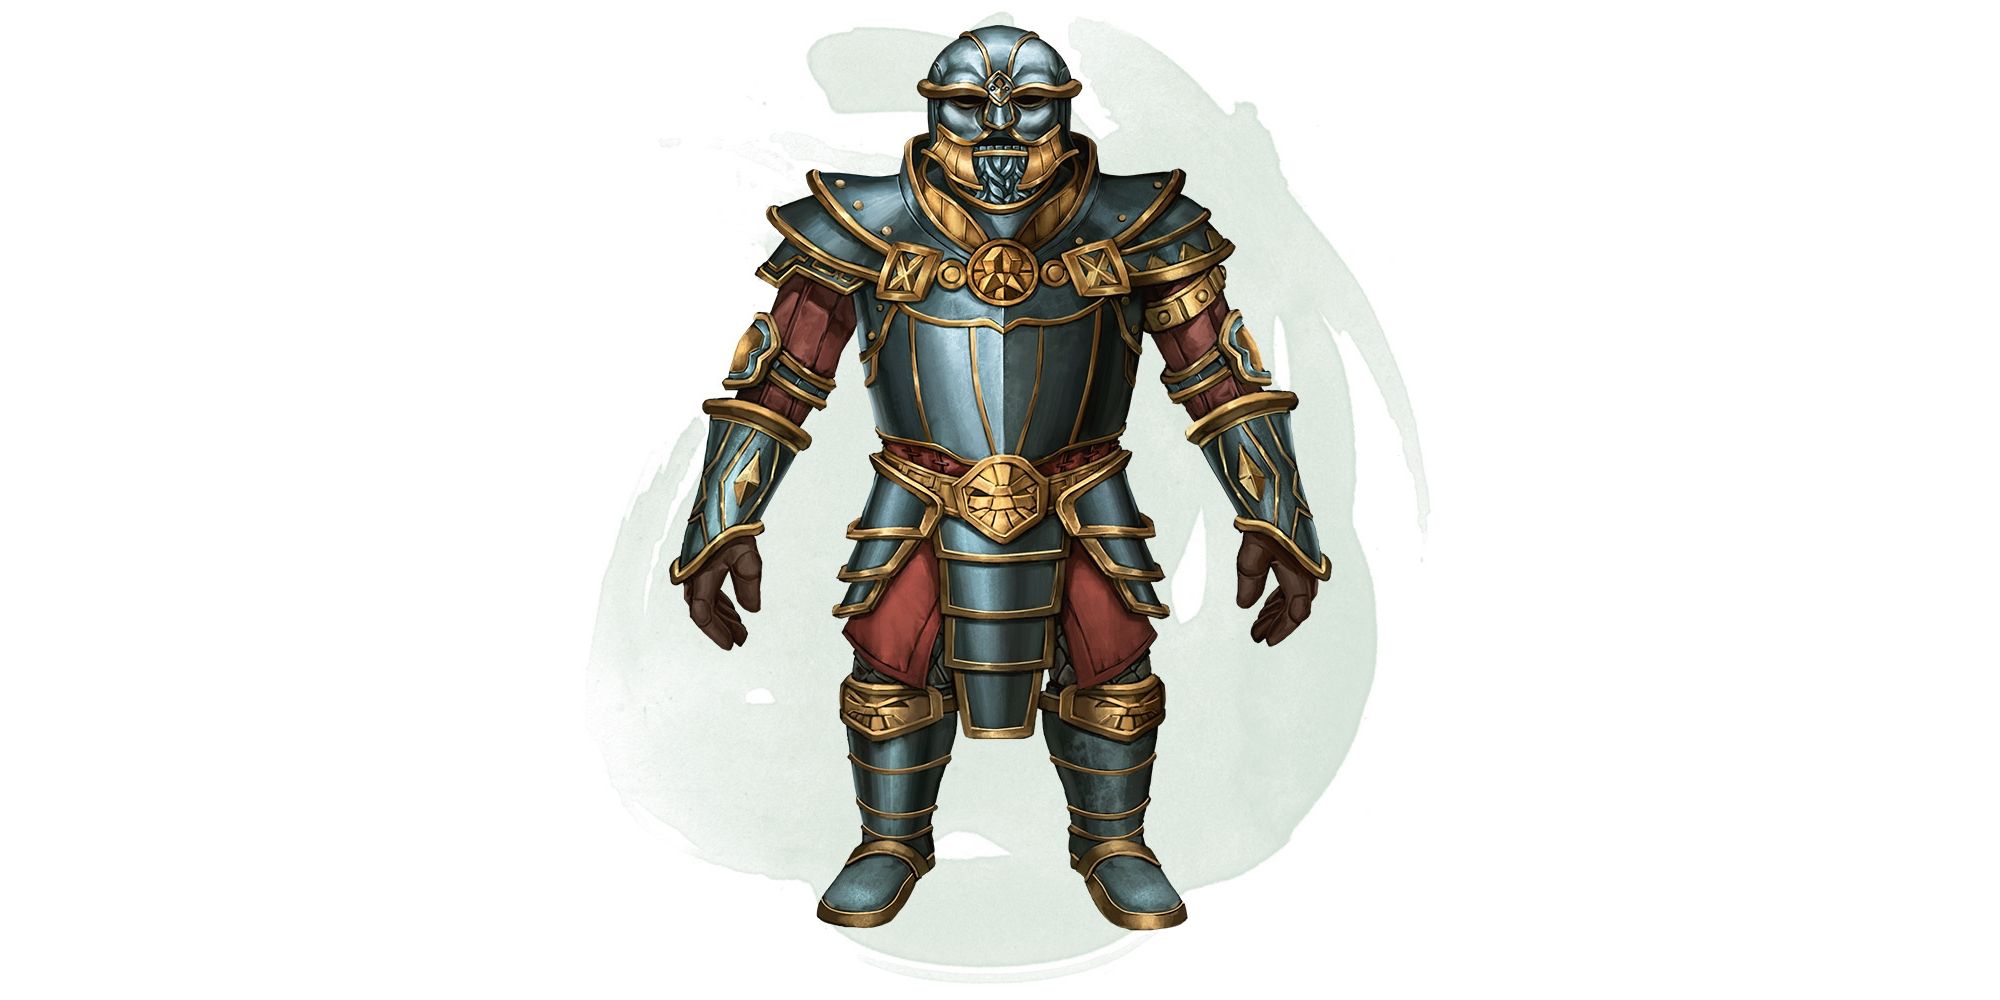 The Armor of Invulnerability from DnD, with bluish and gold plates.